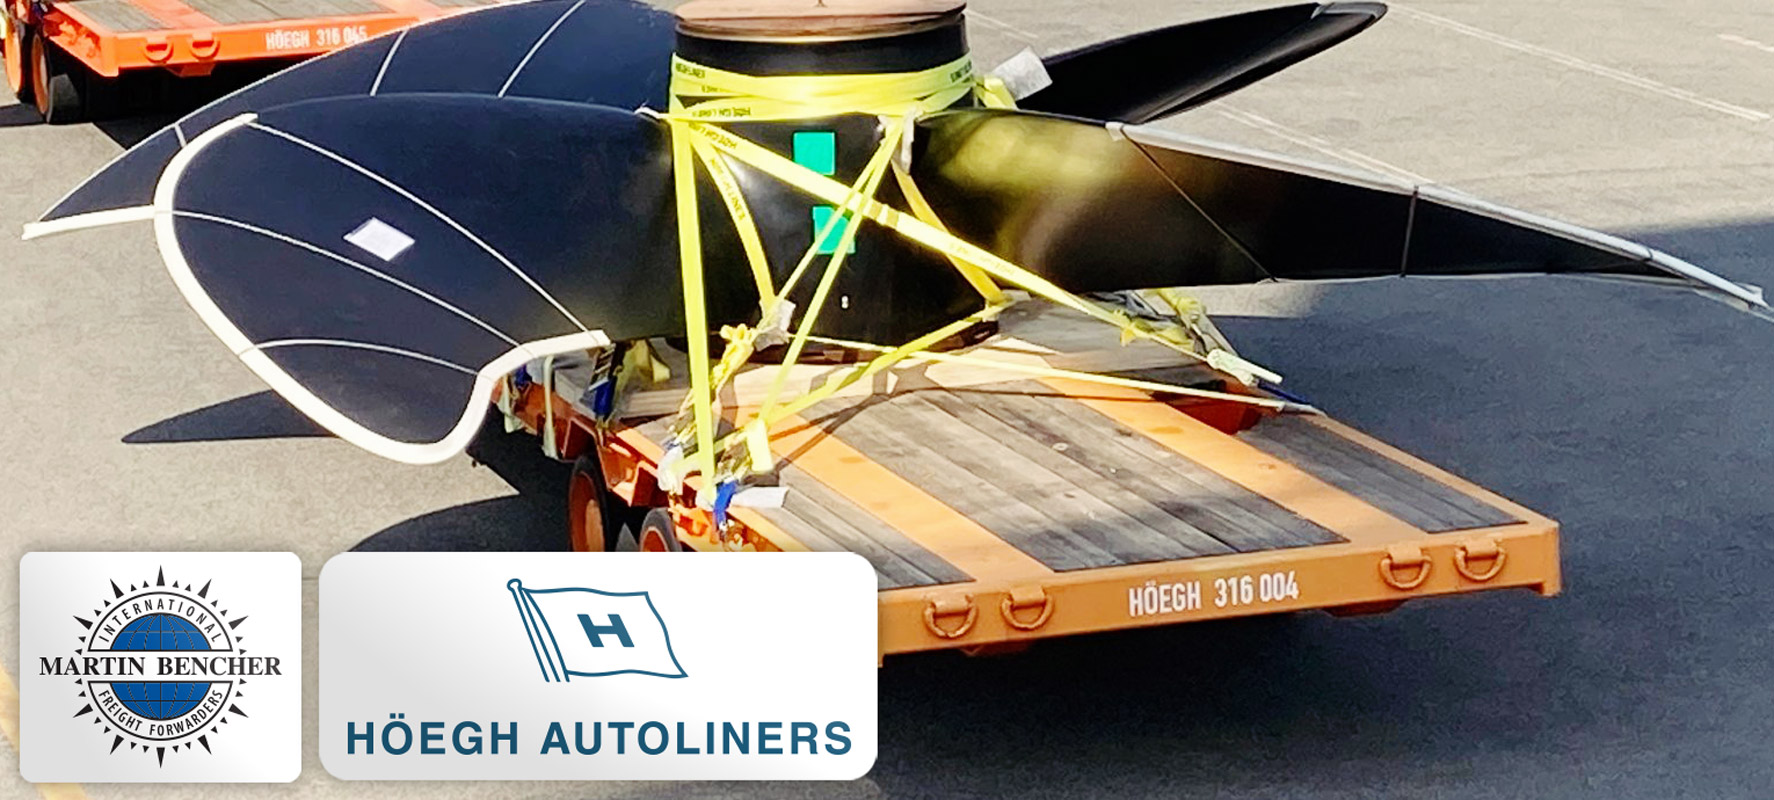 Höegh Autoliners Recently Assisted Martin Bencher Group with 33mt Propellers from Asia to Europe